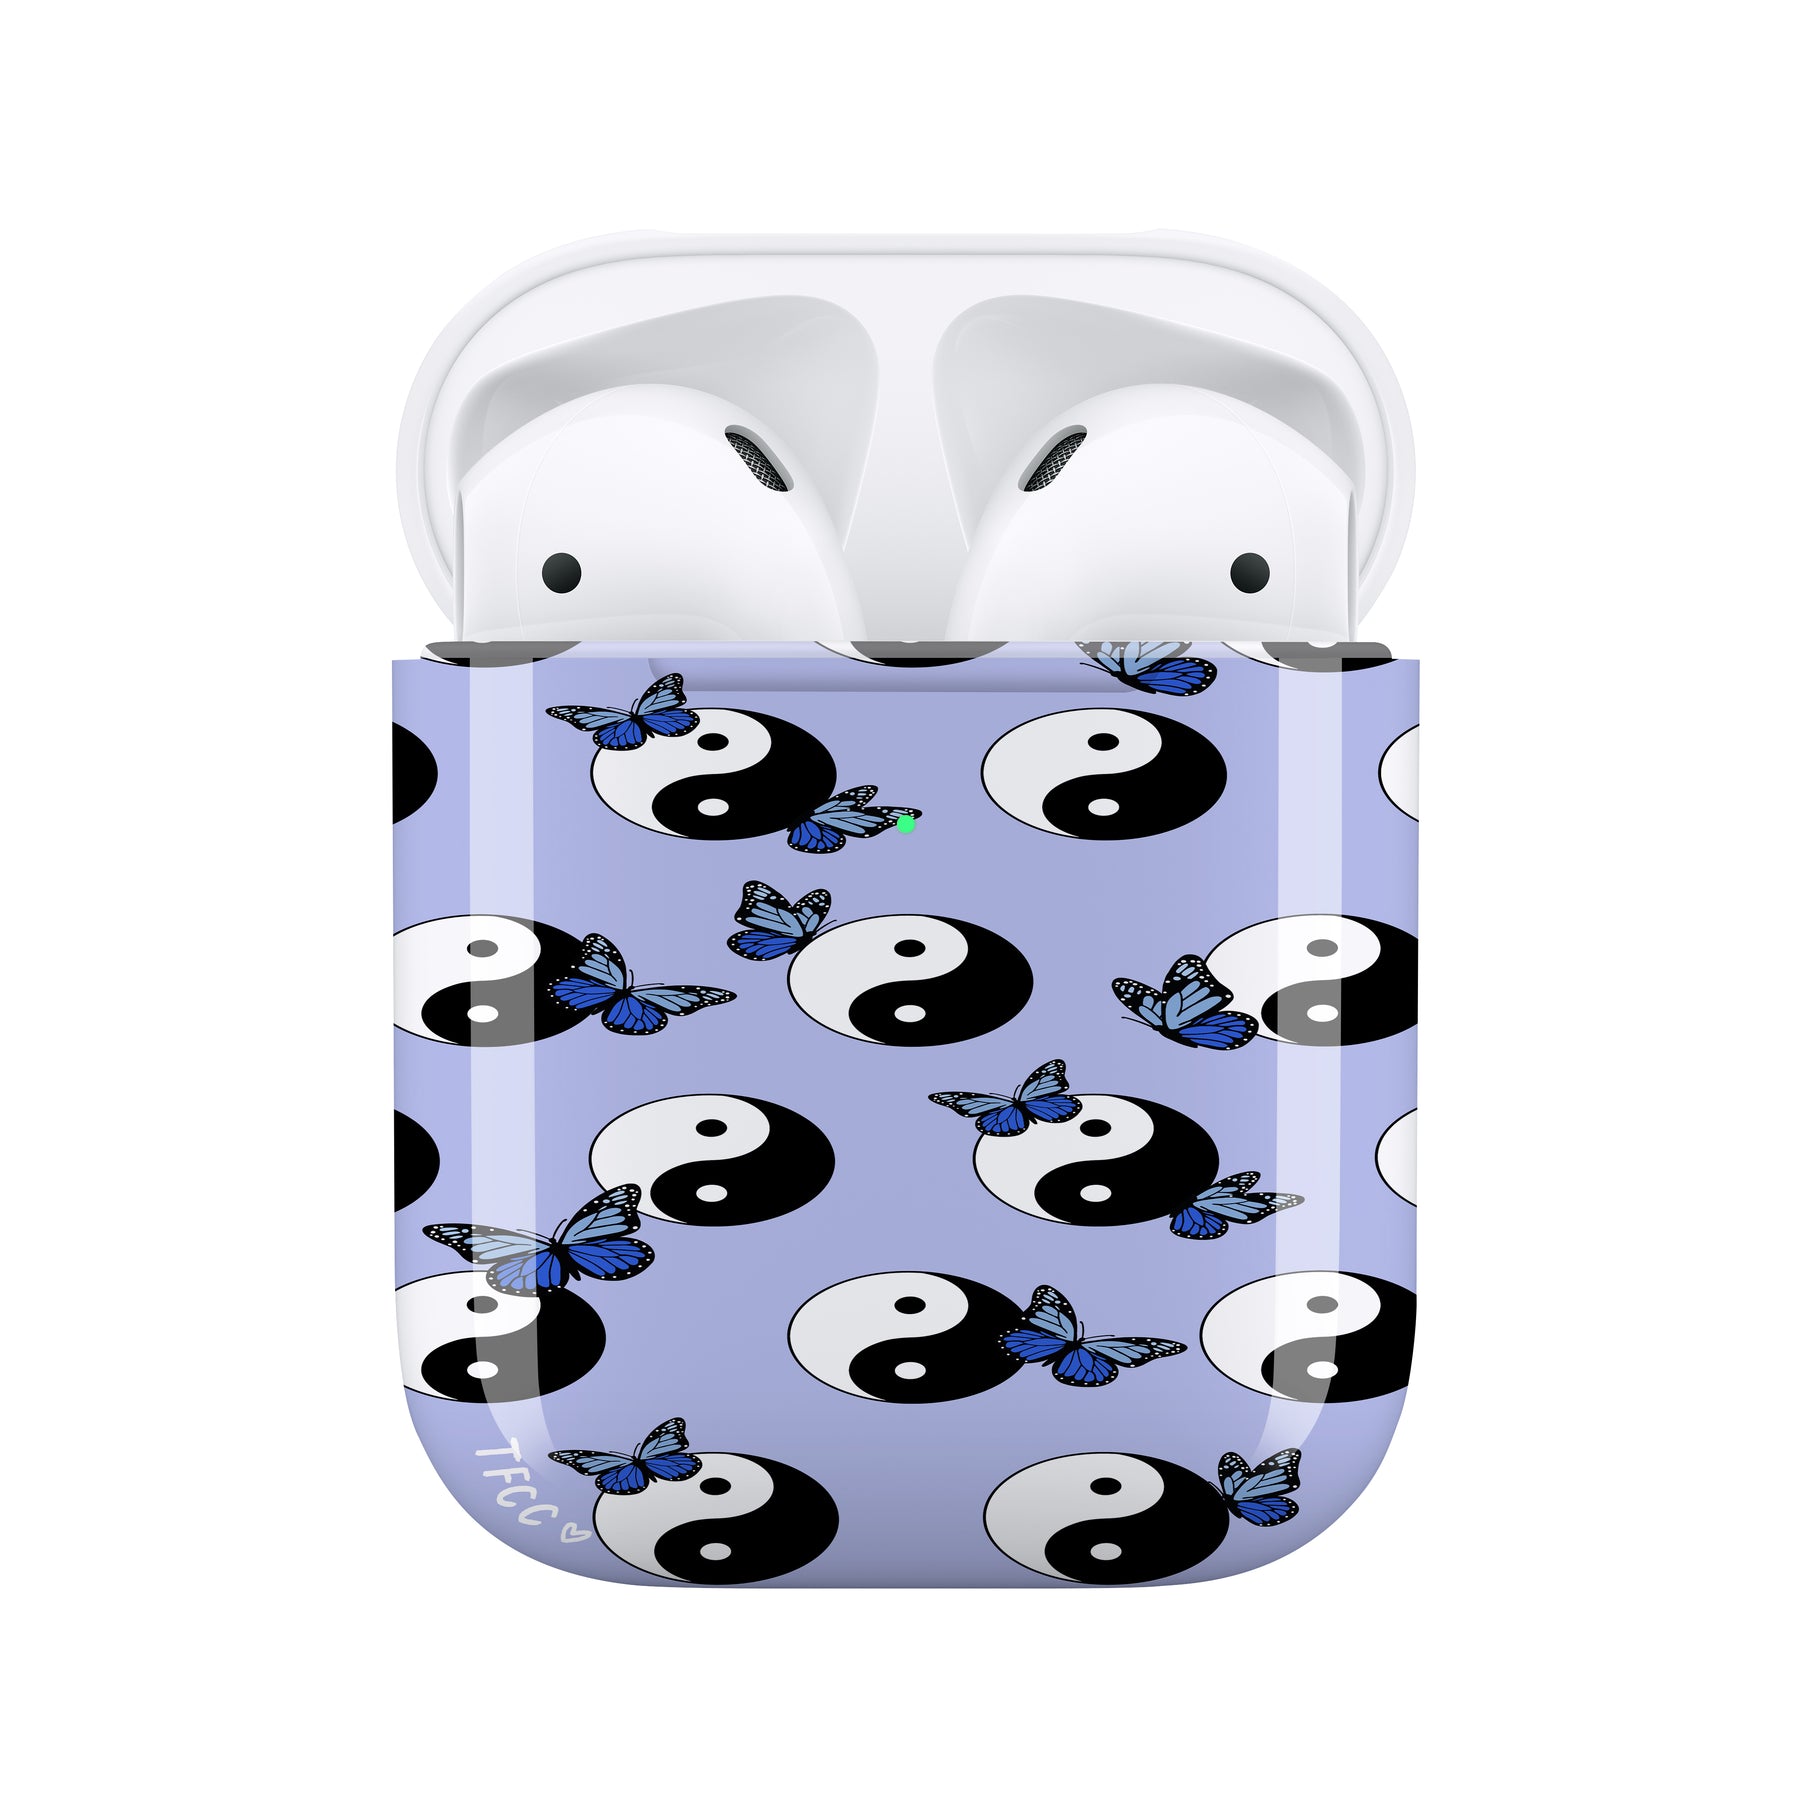 Ying Yang AirPods Case - thefonecasecompany